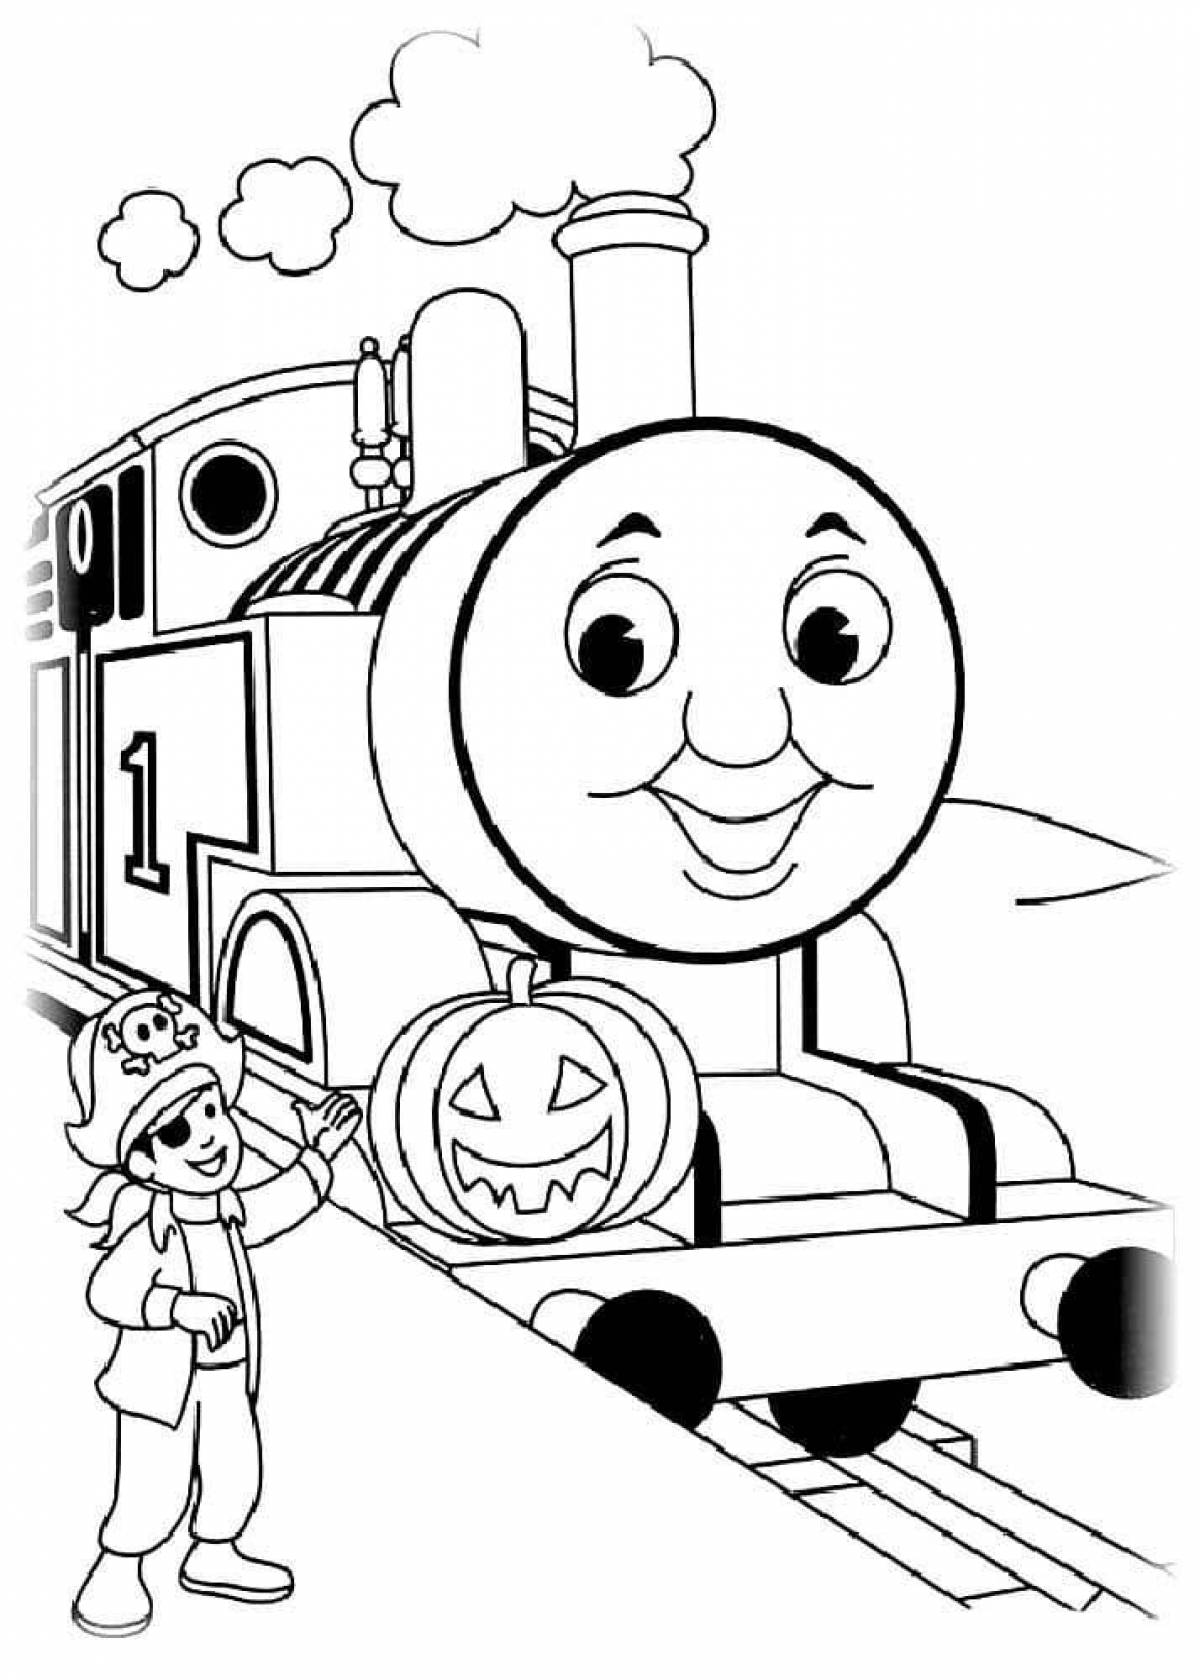 Thomas the Magnificent Tank Engine Coloring Page